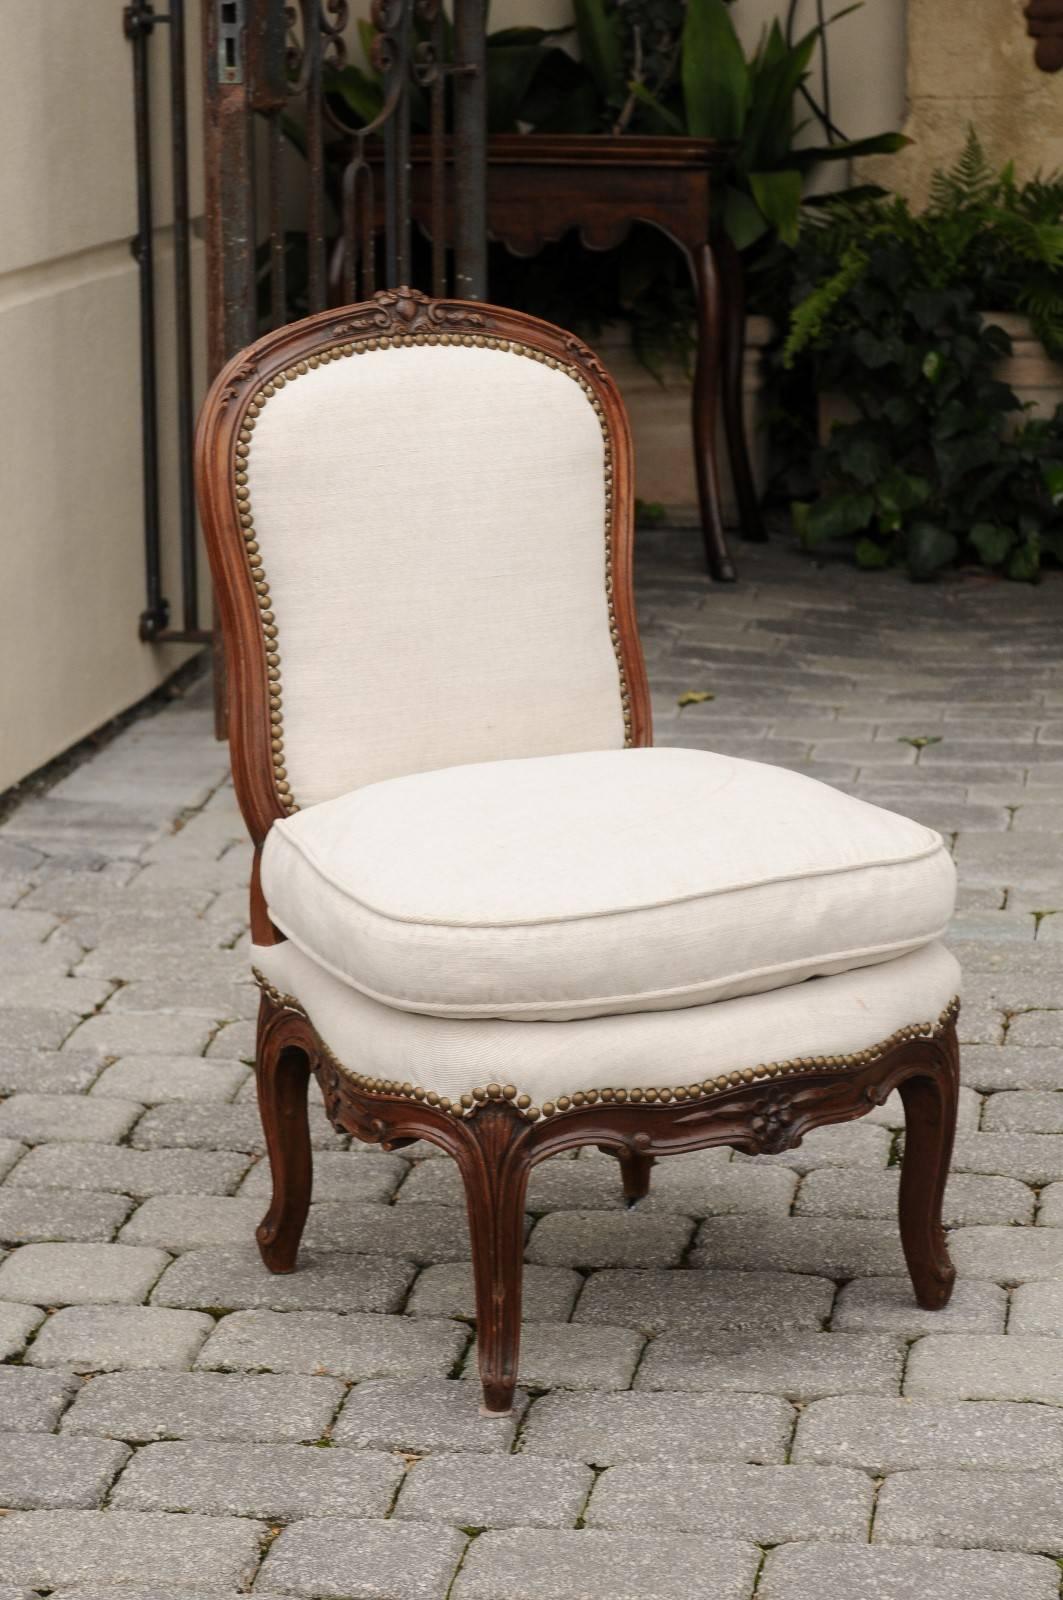 This French 18th century Louis XV slipper chair features a slightly slanted back with a delicately carved floral carving at the crest. This small size chair is upholstered with linen and nailhead surround on the back and seat with a comfortable